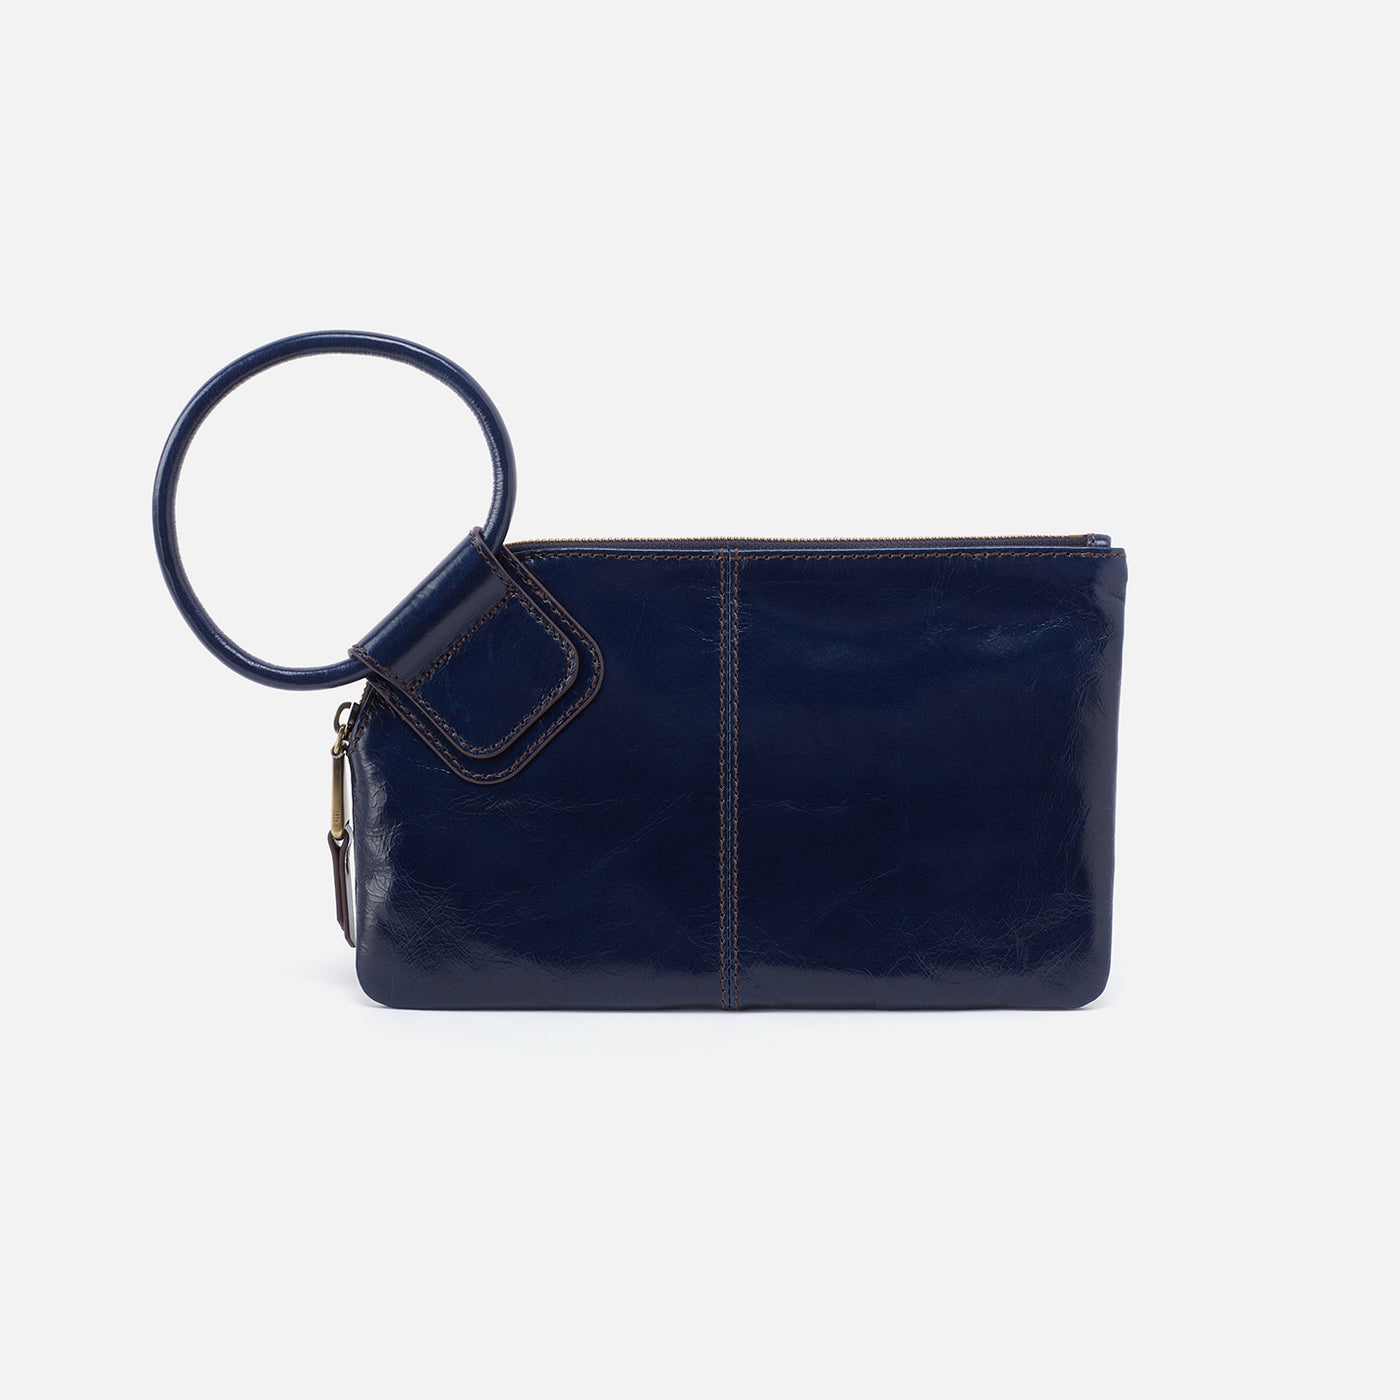 Sable Wristlet in Polished Leather - Nightshade